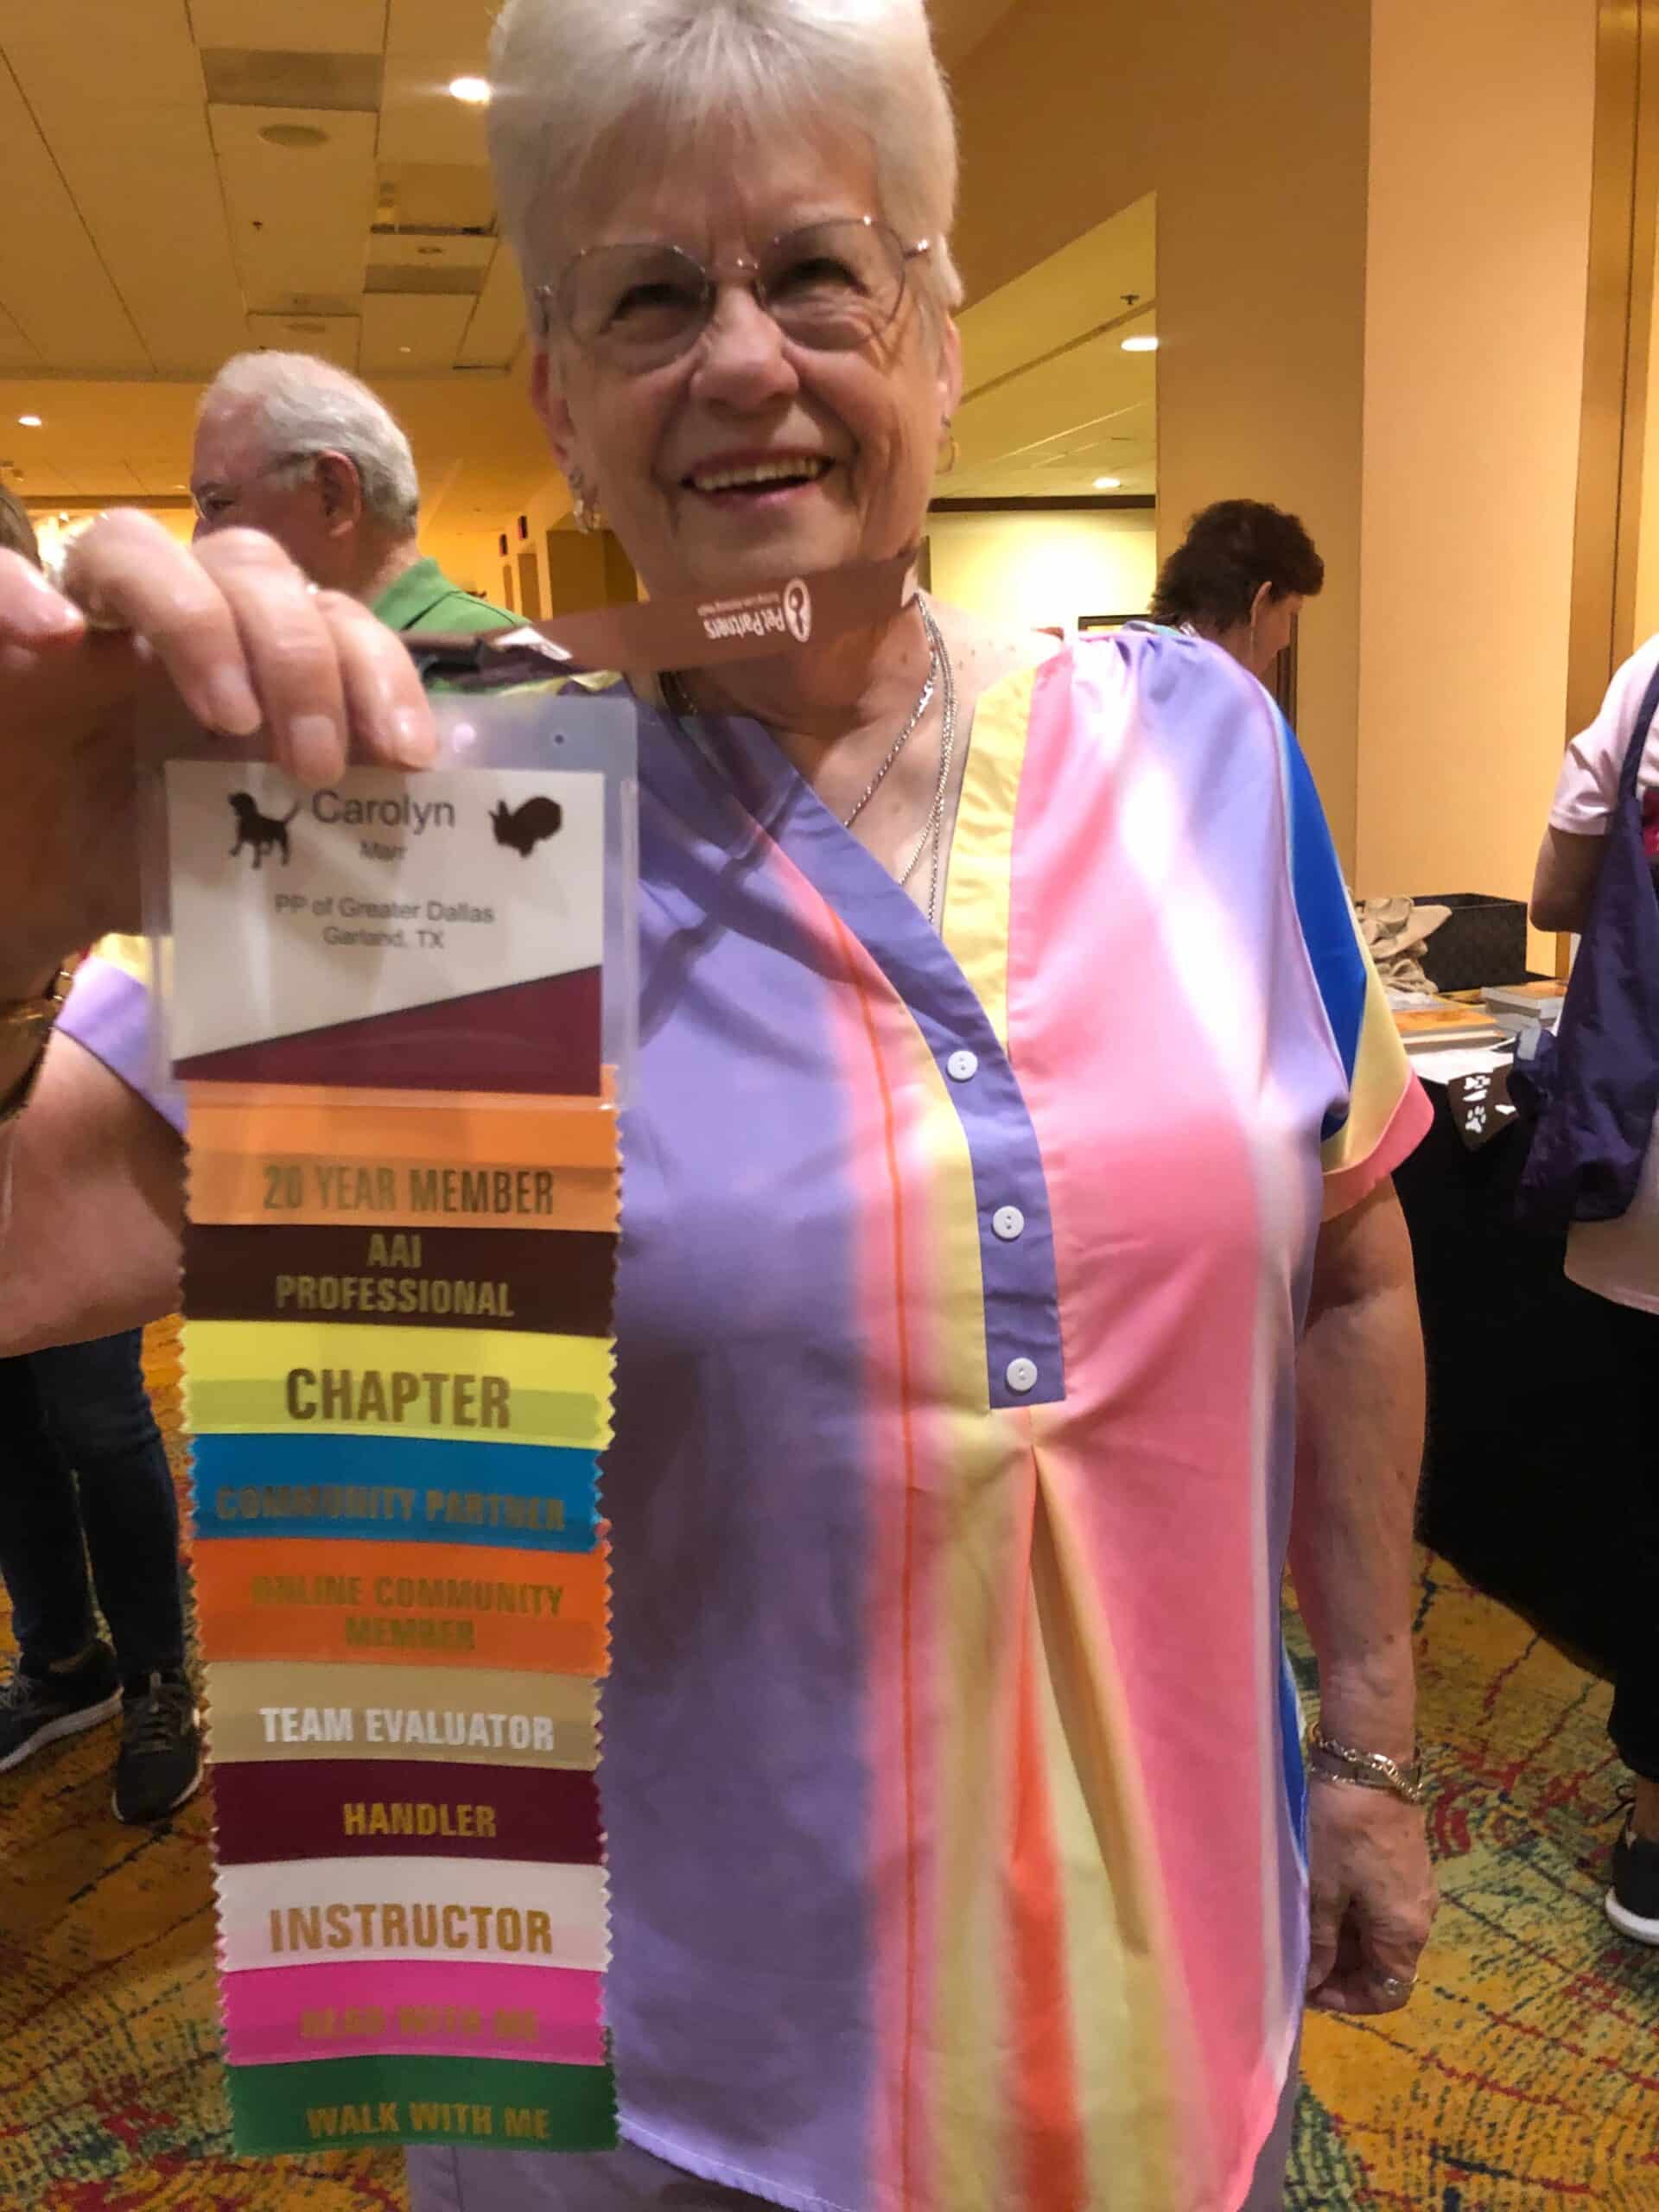 A smiling woman shows off a conference badge with a long string of identifying ribbons attached to it.